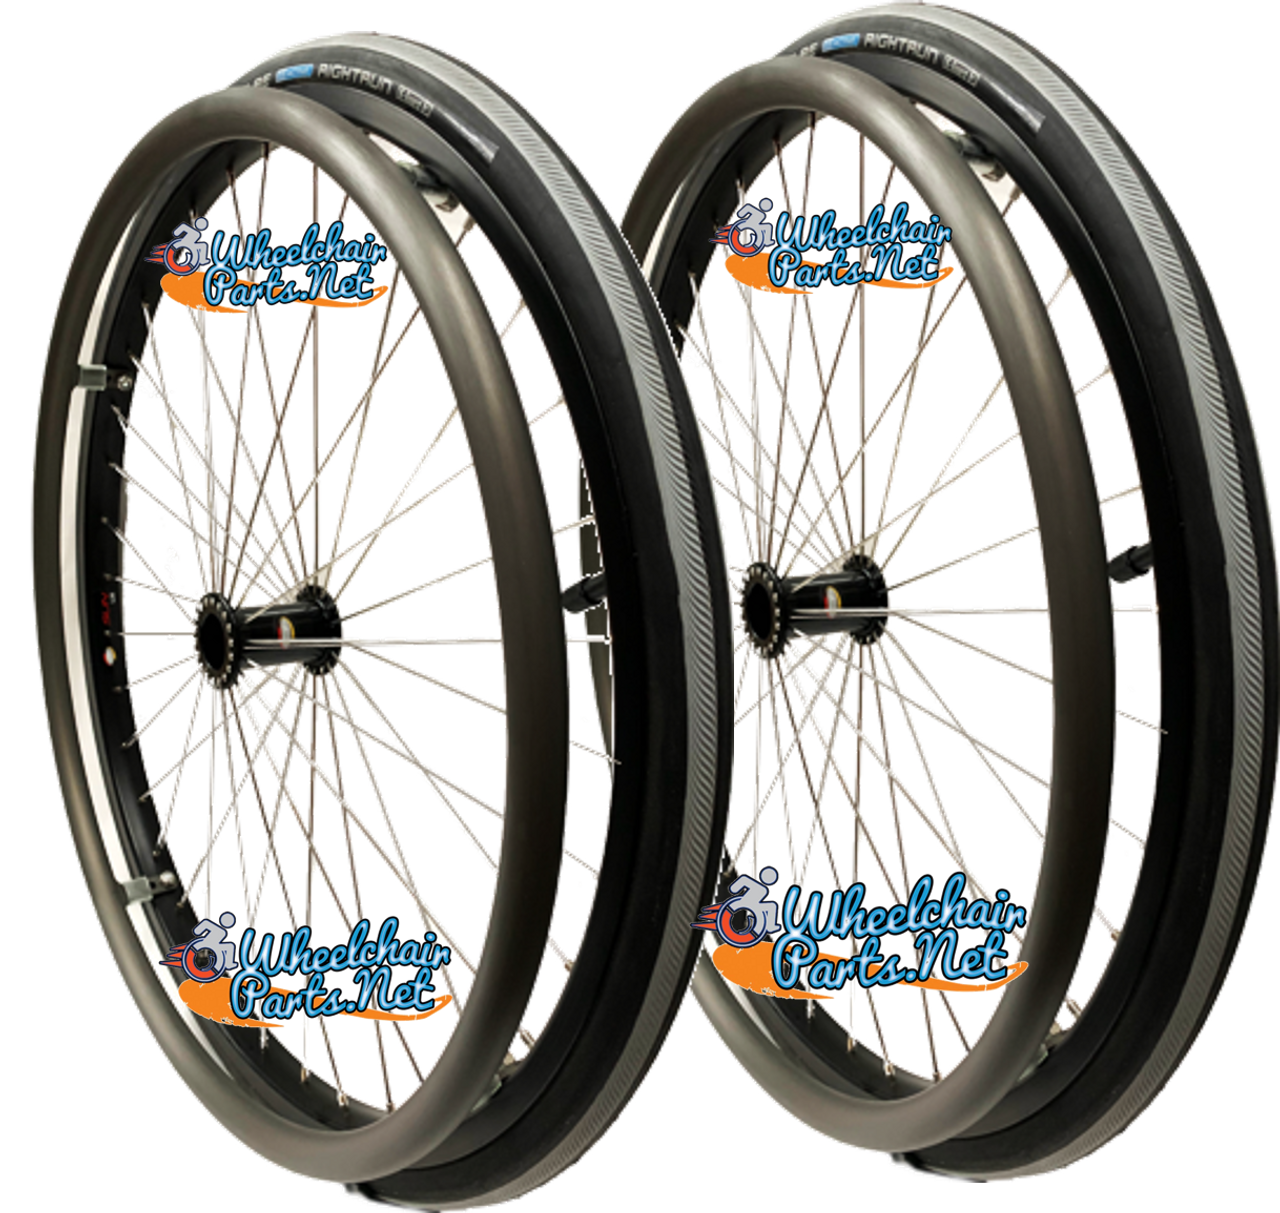 22" x 1 3/8" Sun L20 Rim With SCHWALBE RIGHTRUN, NON-MARKING TIRES SET OF 2 WHEELS